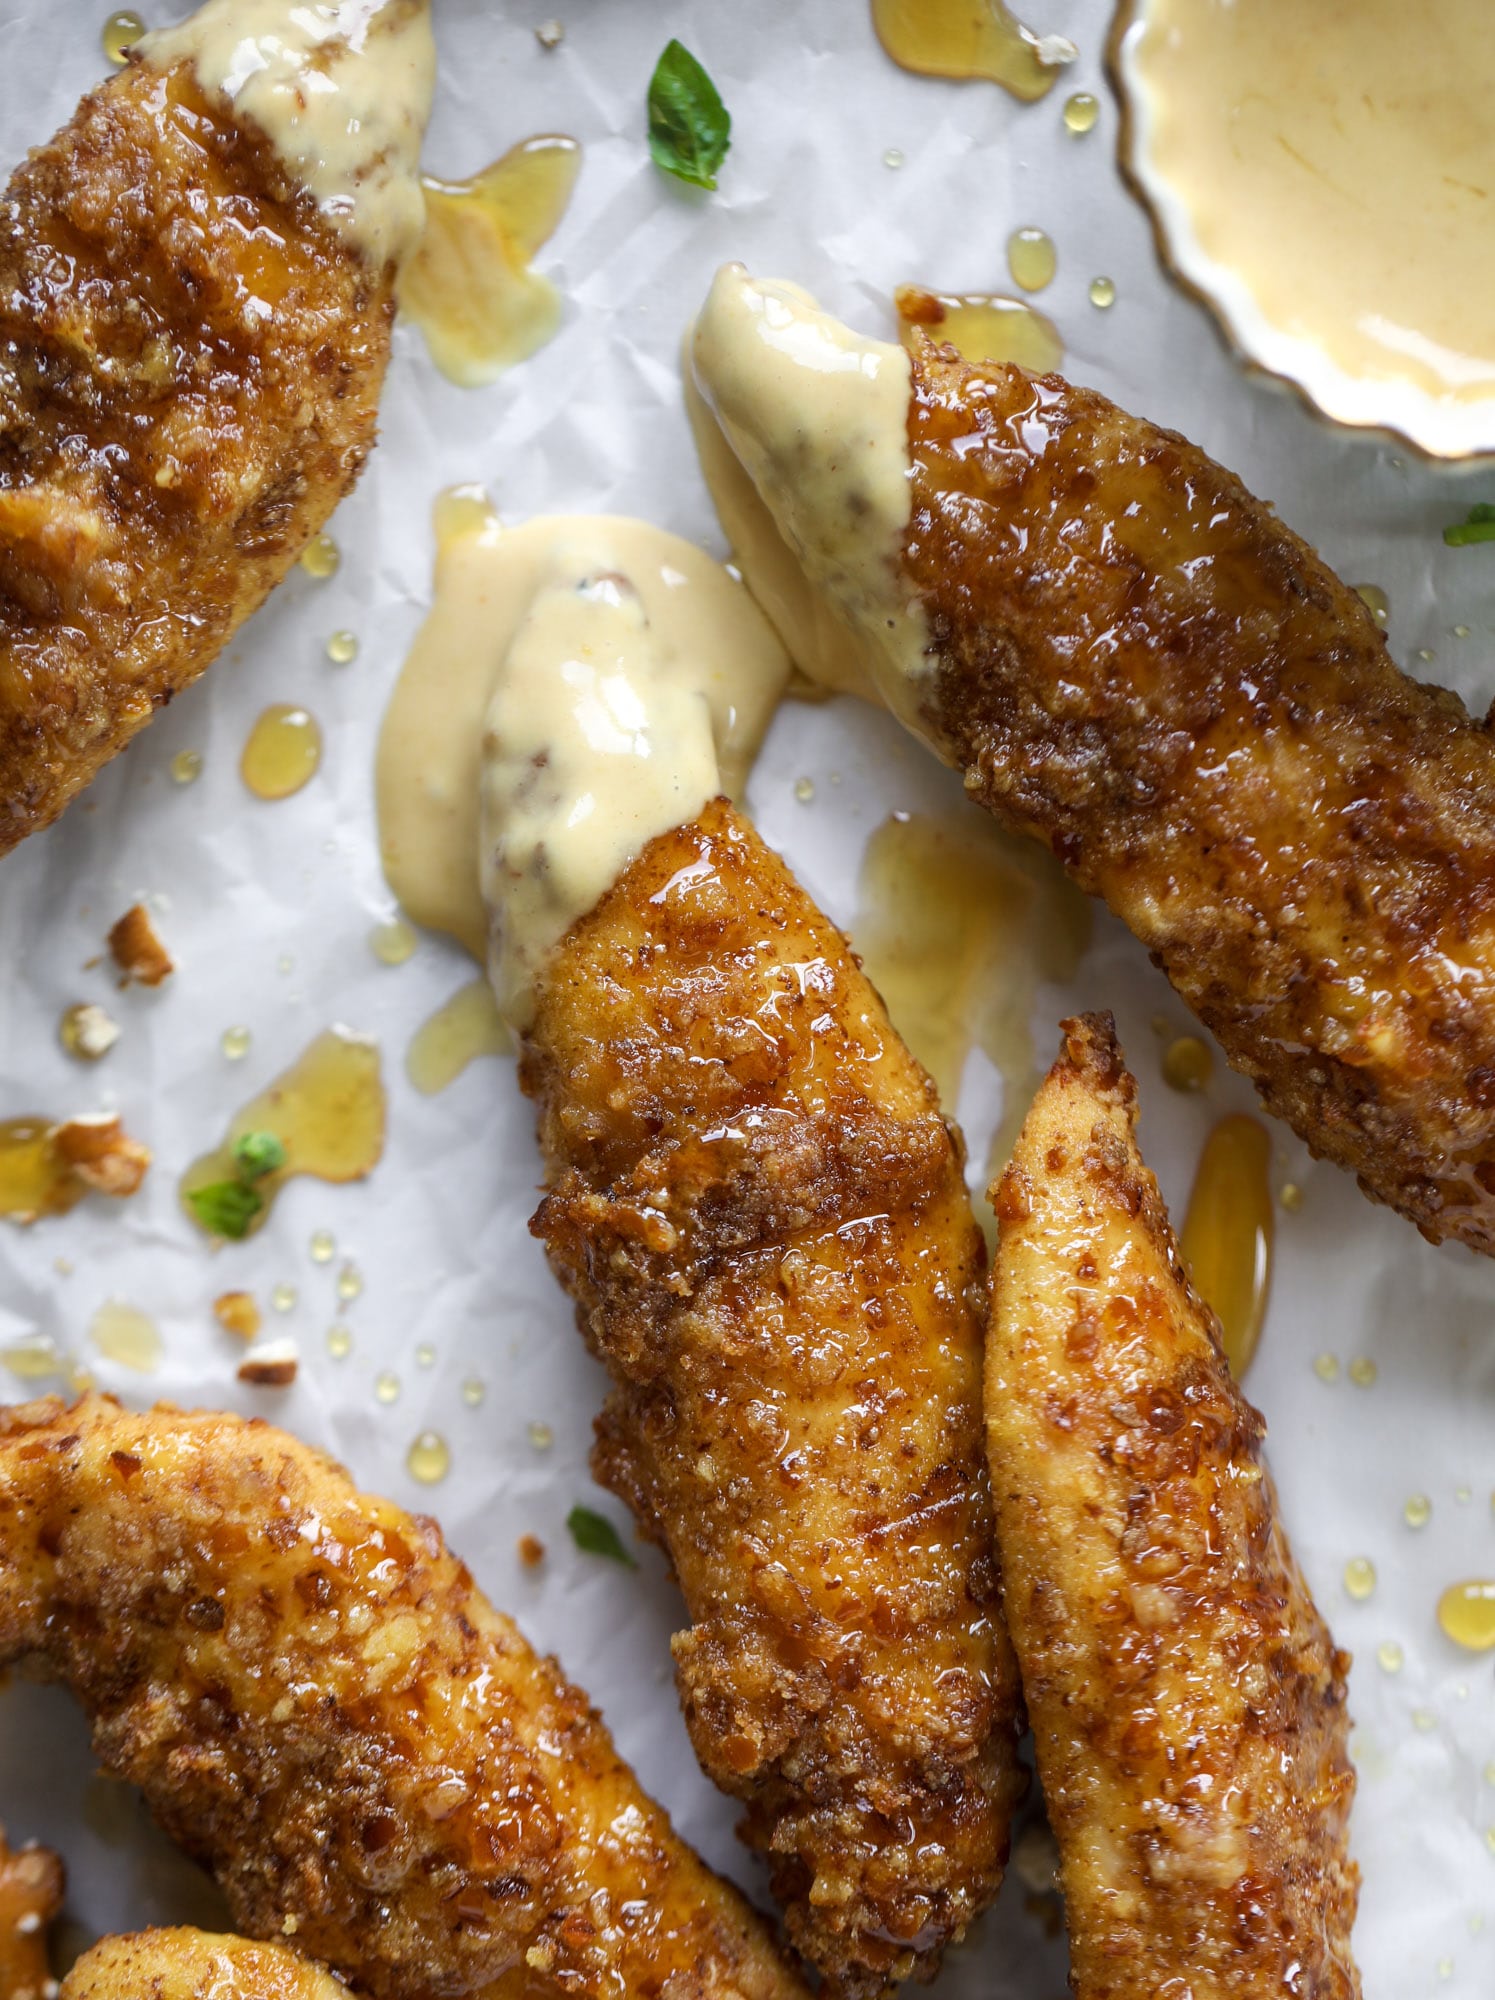 These pretzel crusted chicken fingers are baked, crunchy and ridiculously flavorful. Drizzle with hot honey and dip in house sauce. Yum!